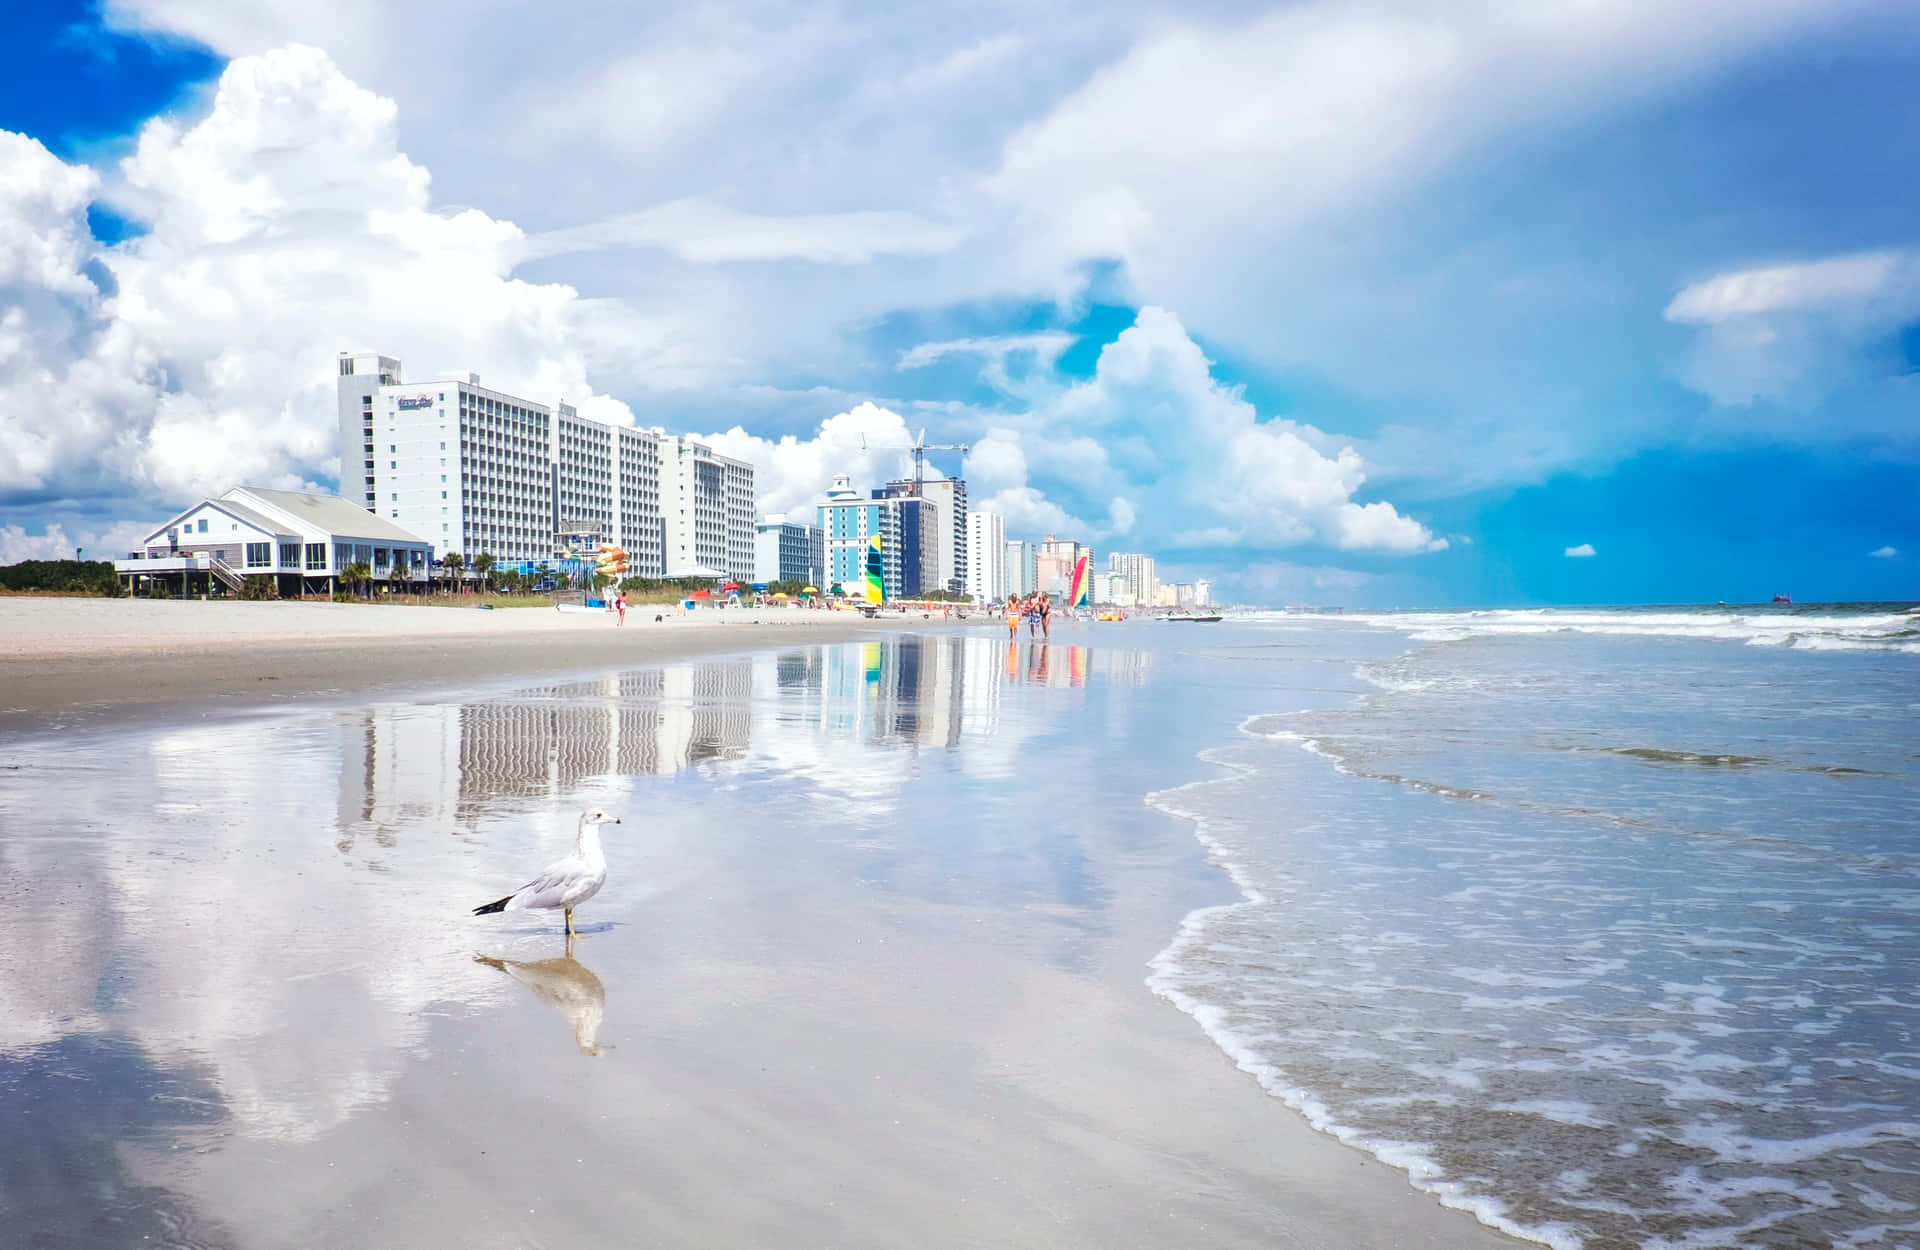 Enjoy relaxing days spent on the beautiful beaches of Myrtle Beach